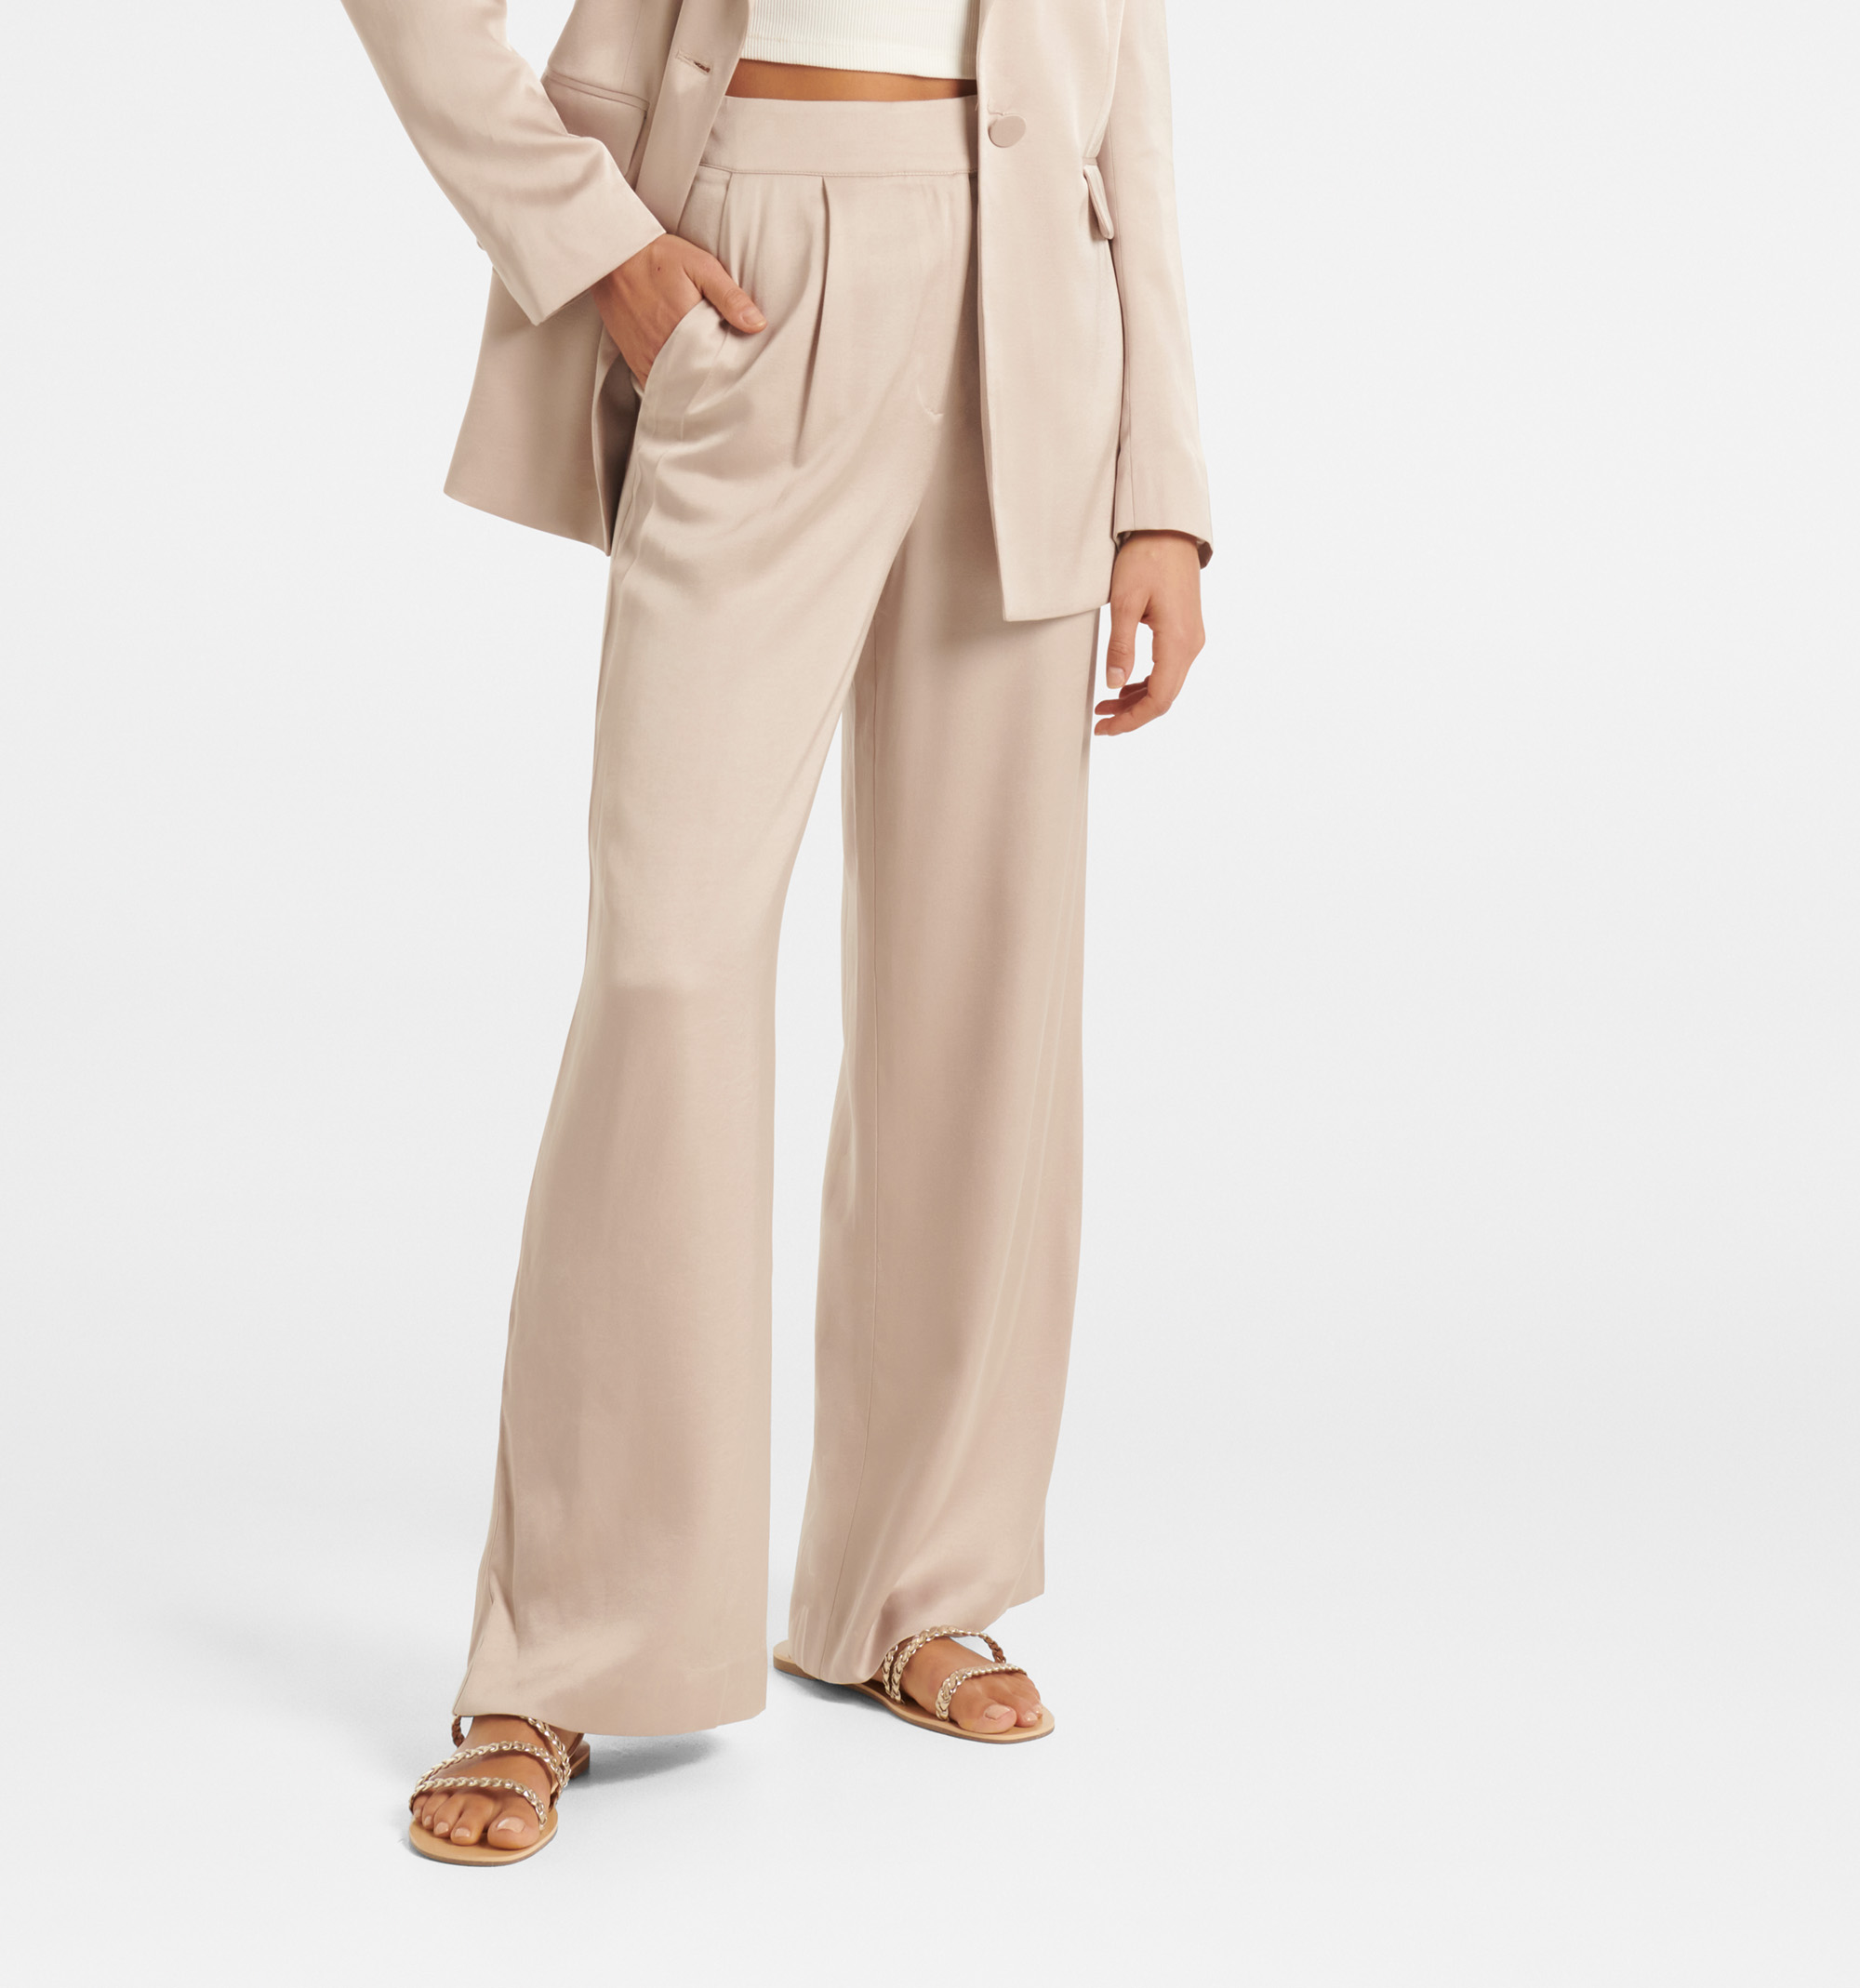 Pants With Matching Belt Casual Formal Office Trousers For Ladies - Beige -  Wholesale Womens Clothing Vendors For Boutiques